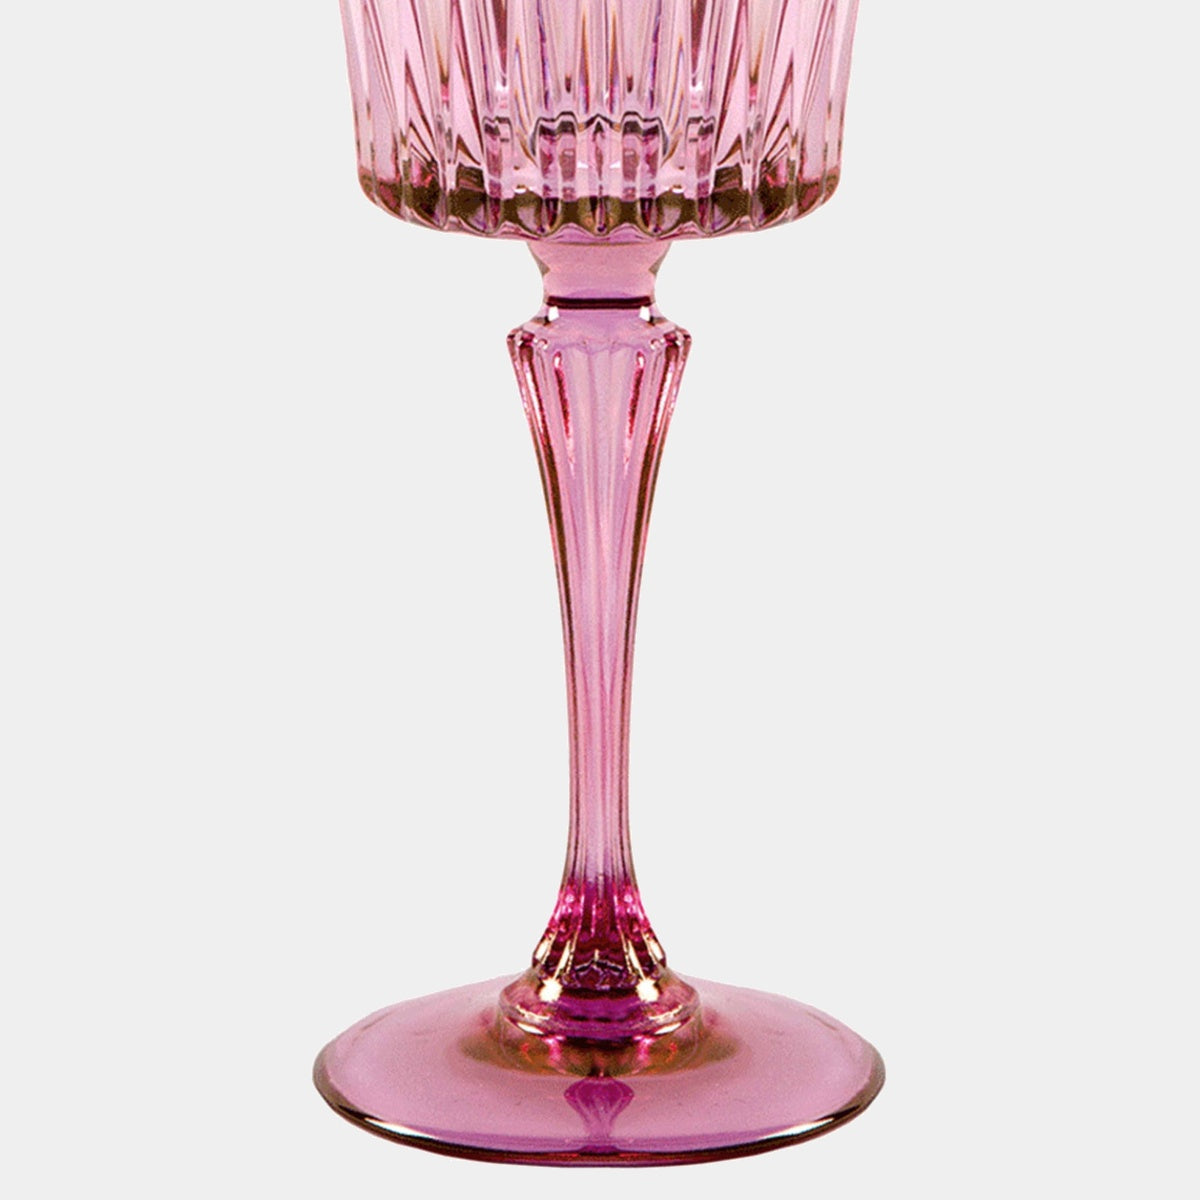 luisa Beccaria home collection domina glass